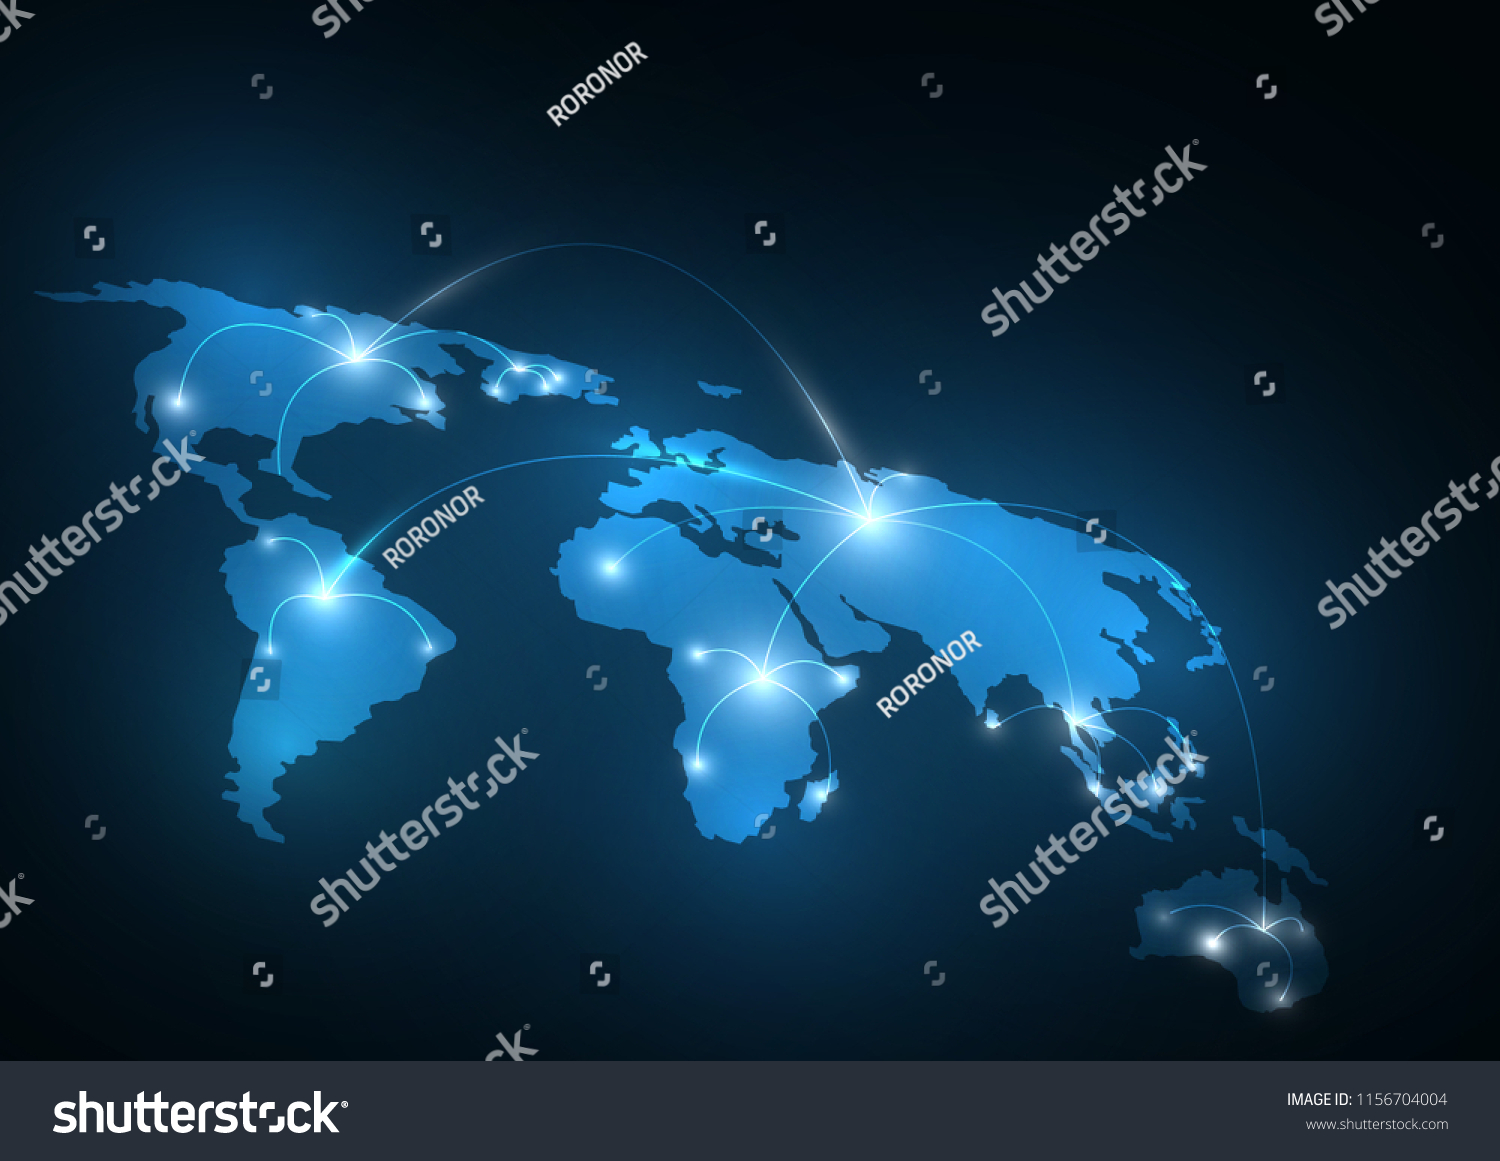 Background of the World Network Connections #1156704004